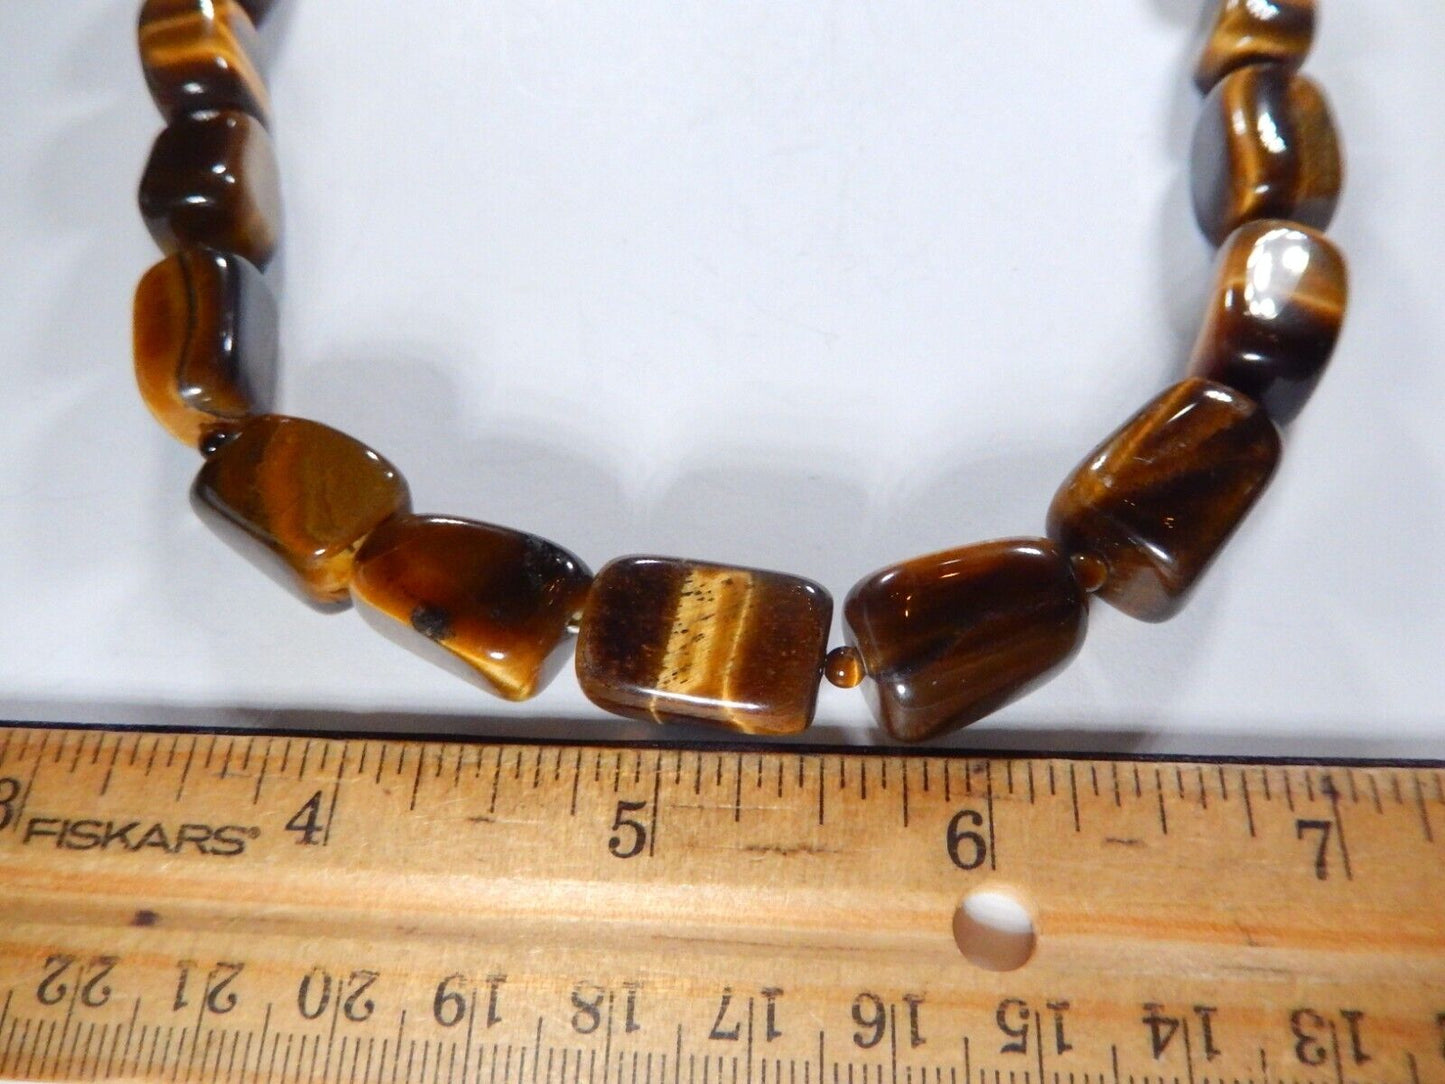 Vintage Tiger’s Eye Large Bead SX 925 Sterling Silver Toggle Necklace - 18"